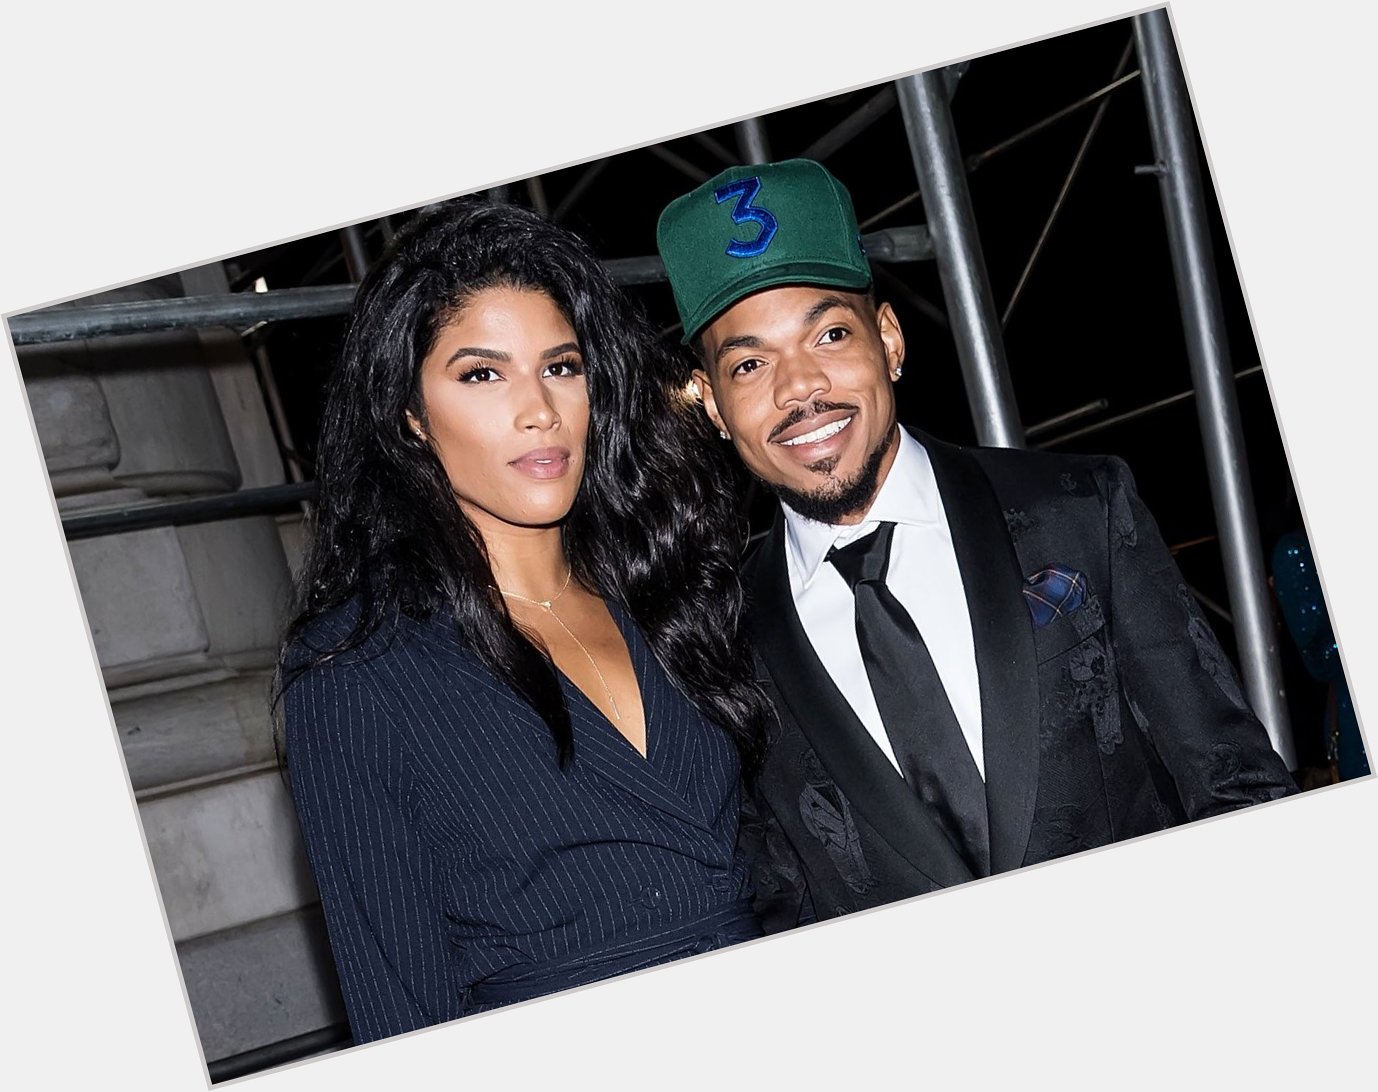 Chance the Rapper gets a heartfelt birthday message from wife Kirsten Corley  